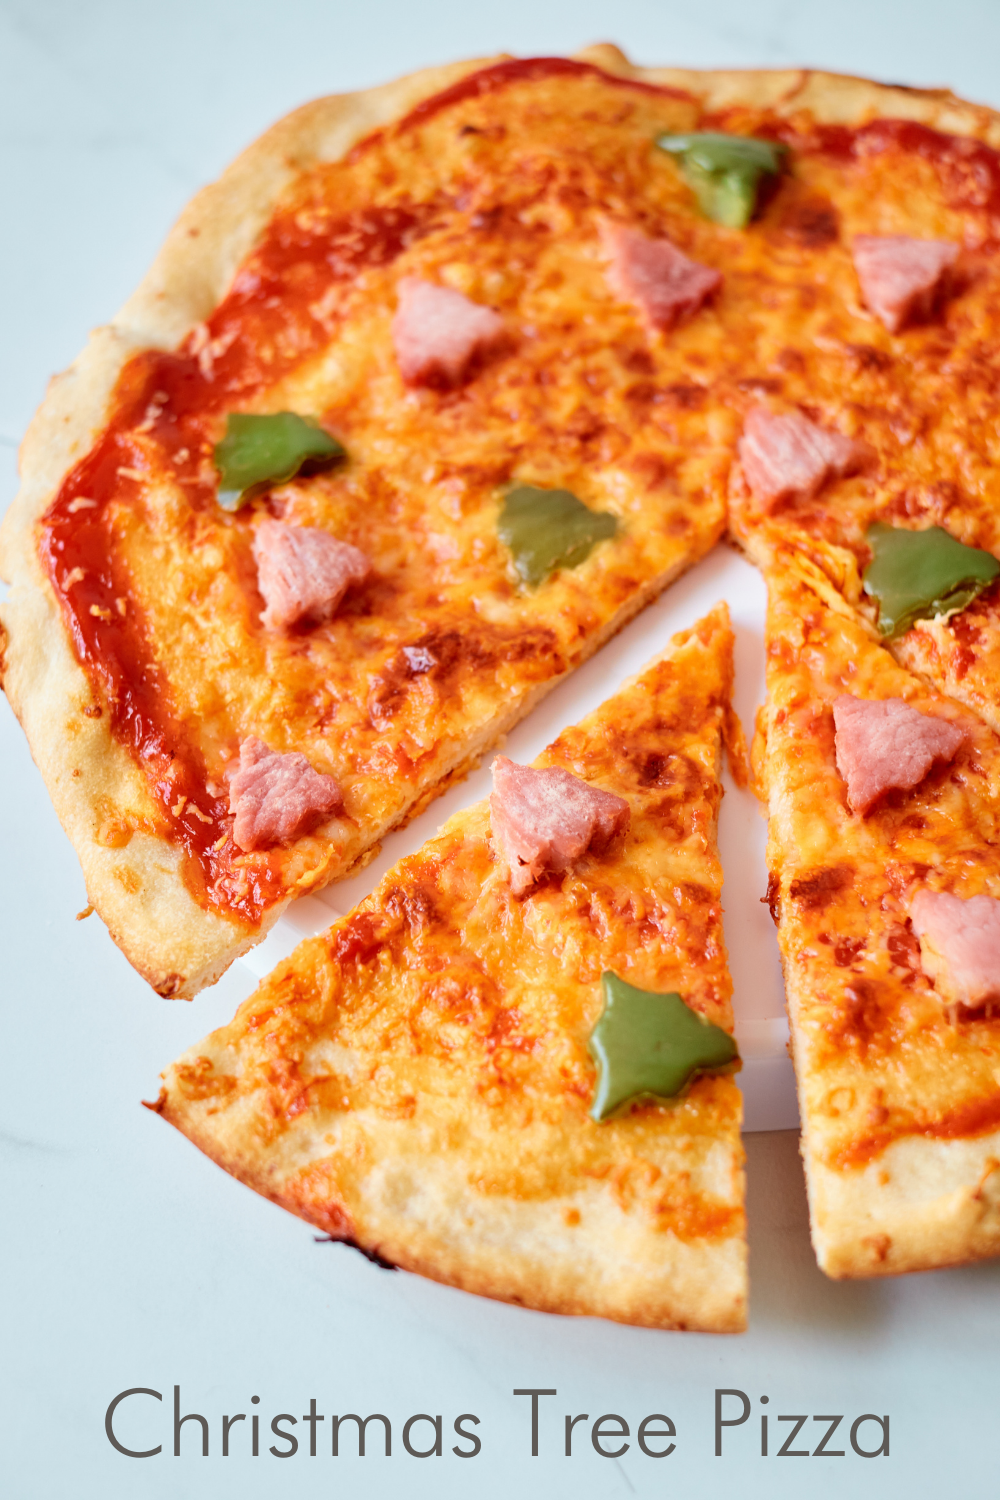 Make pizza night festive with this delicious and easy Ham and Pepper Christmas Tree Pizza! It’s the perfect holiday tradition that the kids can help make!